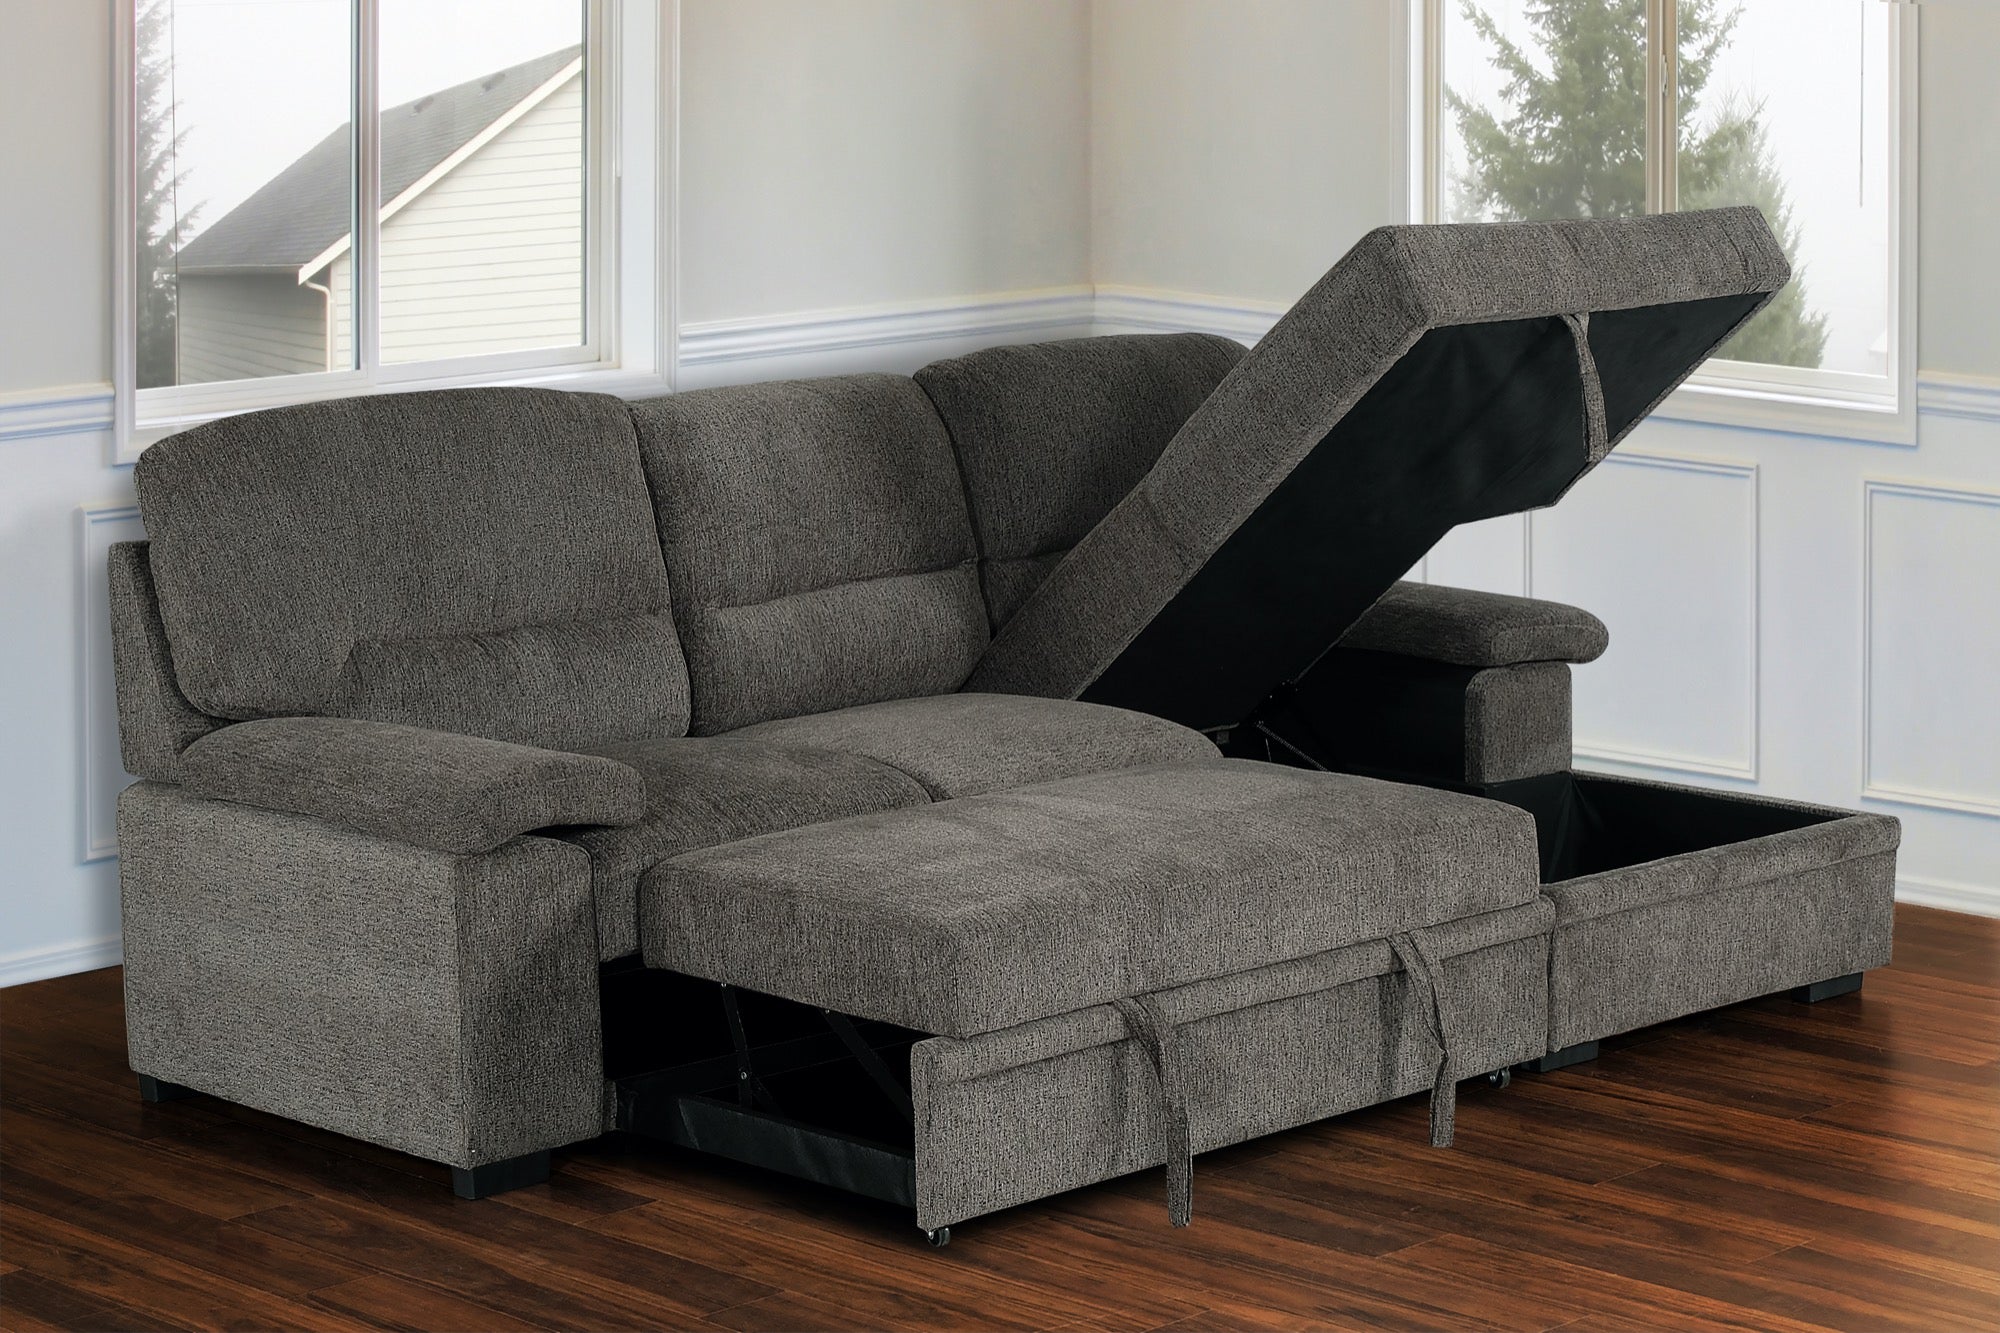 Tessaro Charcoal Sleeper Sectional w/ Popup Storage Chaise